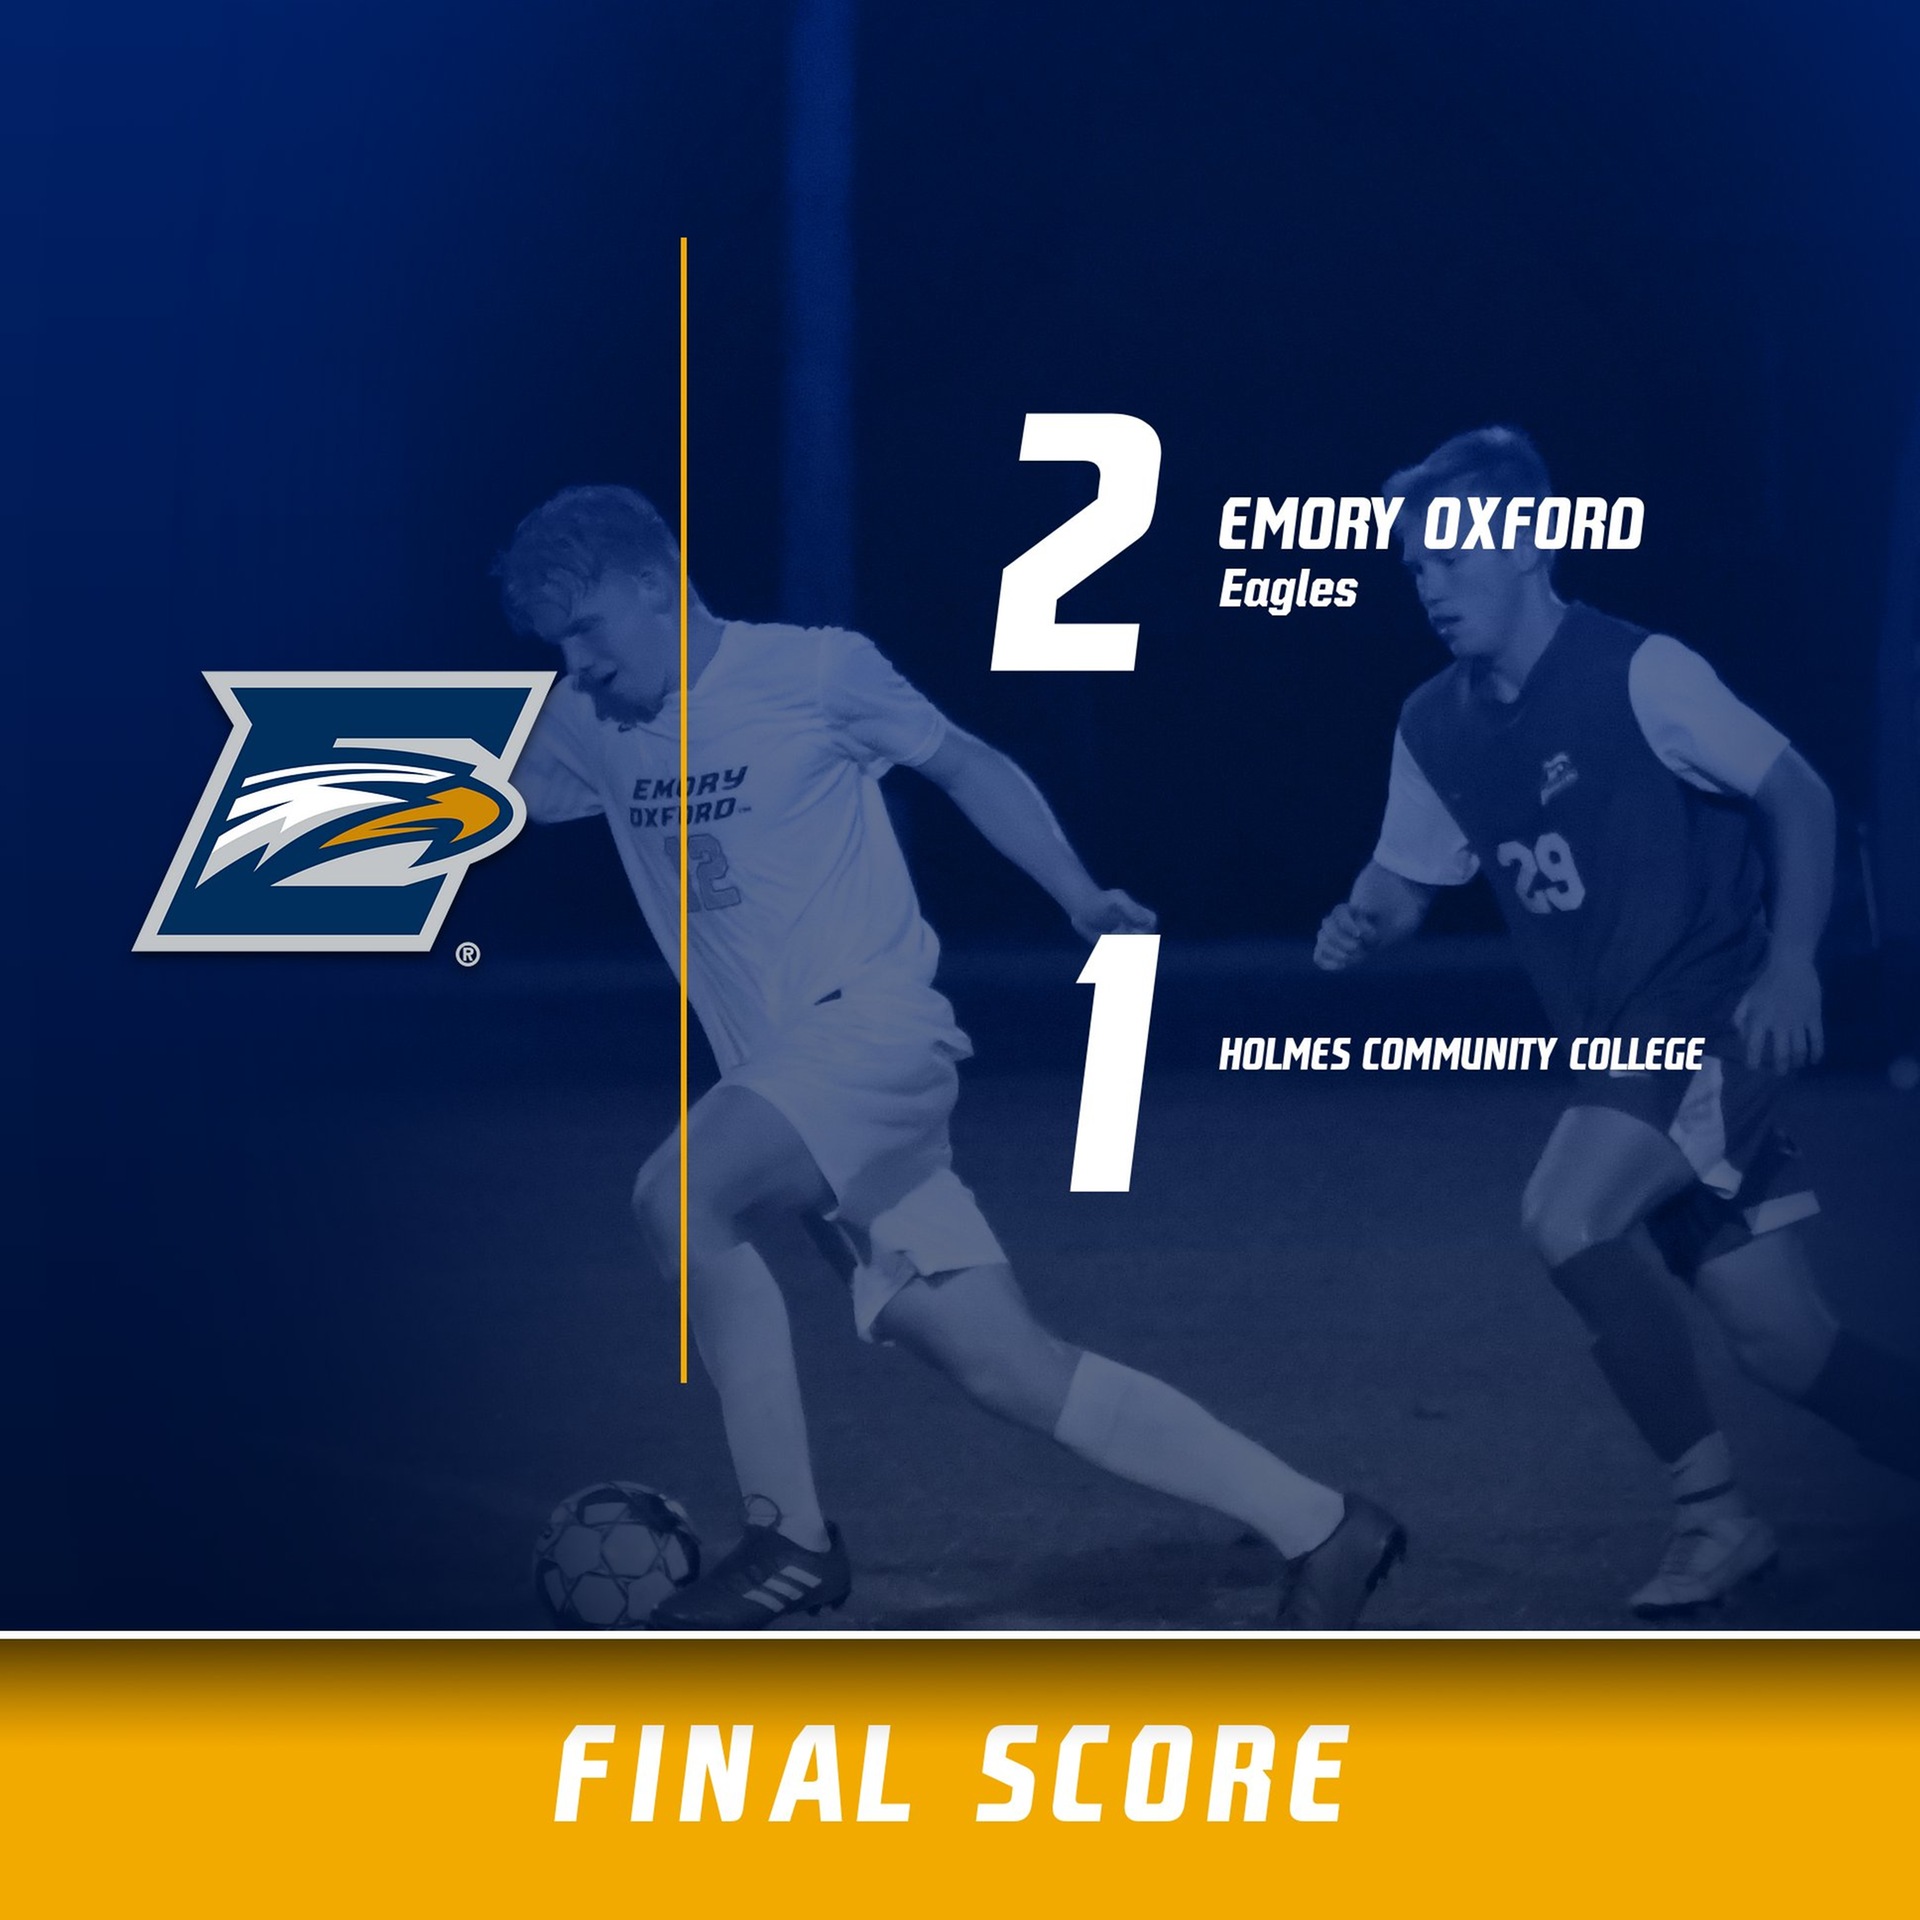 Men’s Soccer prevailed late in a hard fought win over Holmes CC 2 to 1